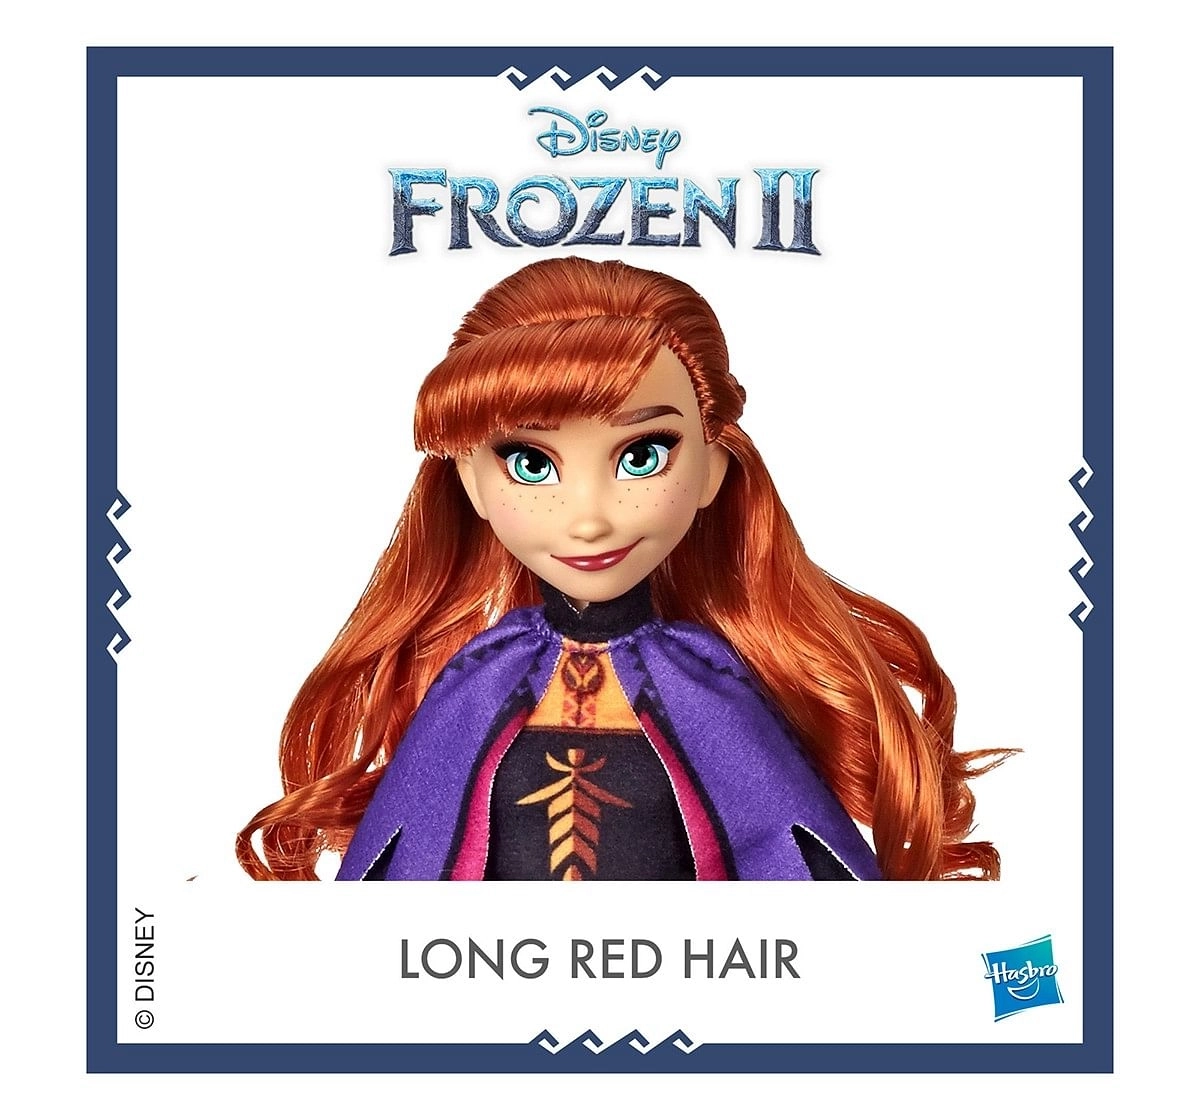 Disney Frozen 2 Anna Fashion Doll With Long Red Hair And Outfit Inspired By Frozen 2 Dolls & Accessories for age 3Y+ 